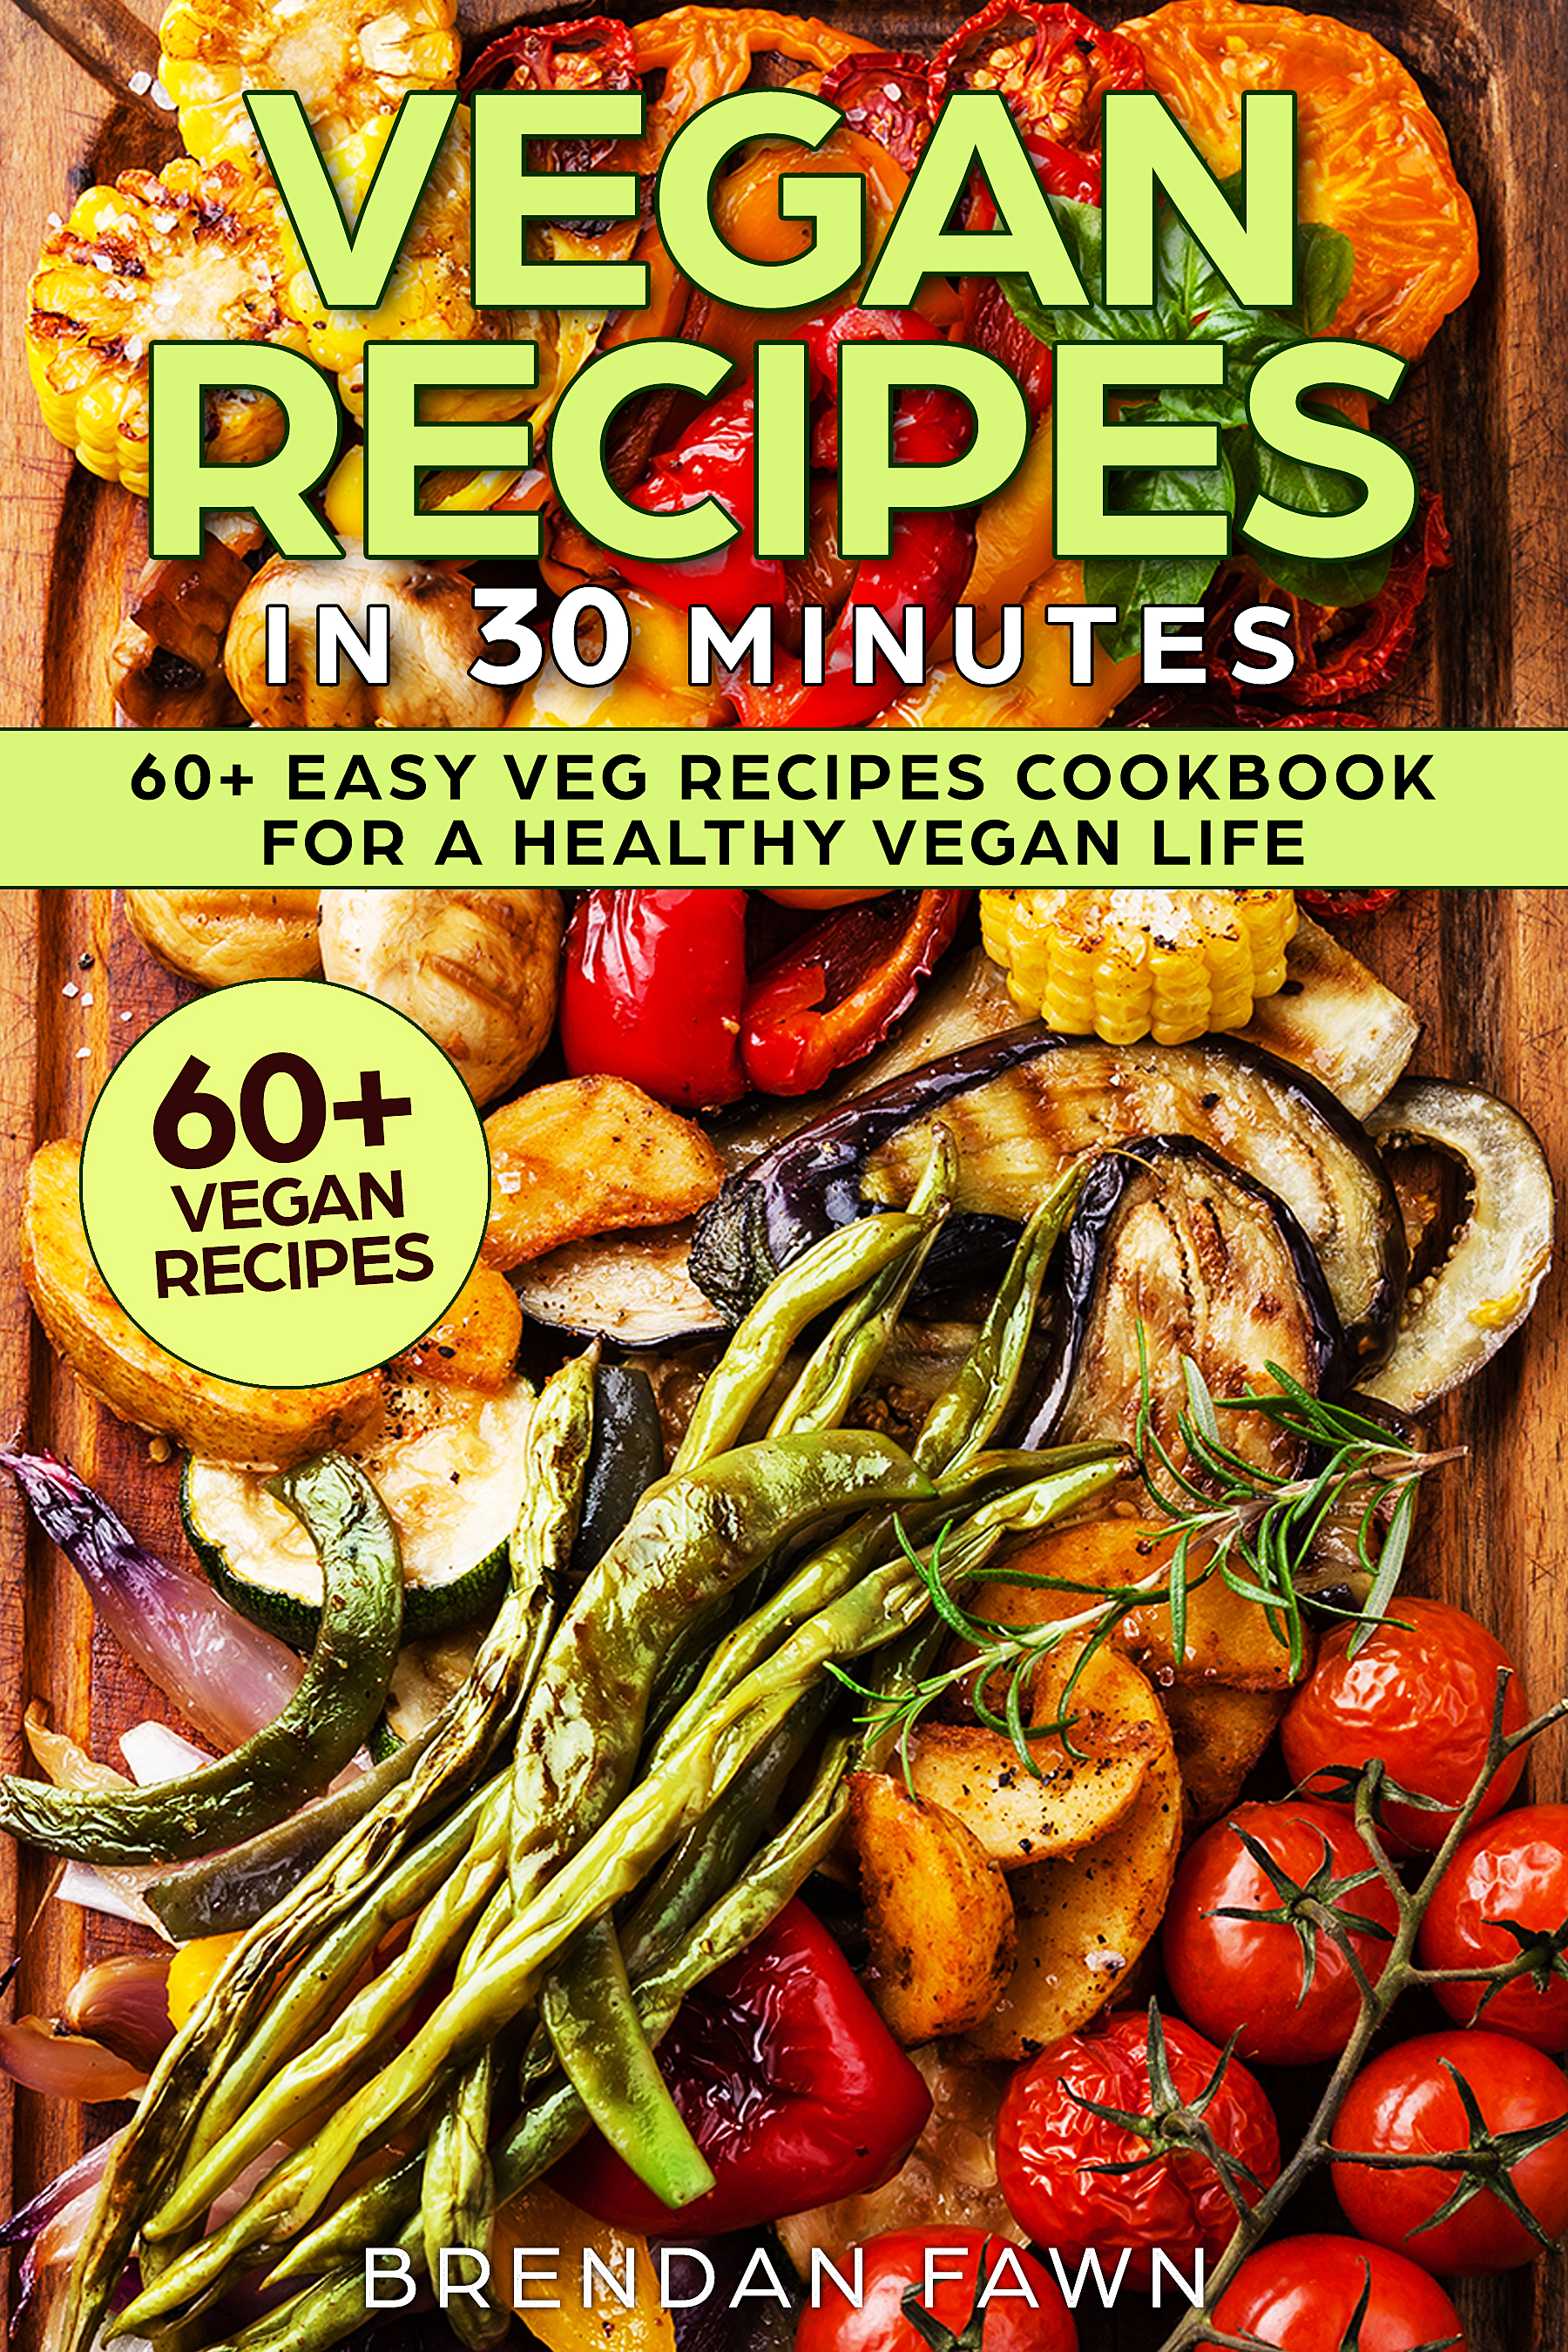 FREE: Vegan Recipes in 30 Minutes by Brendan Fawn